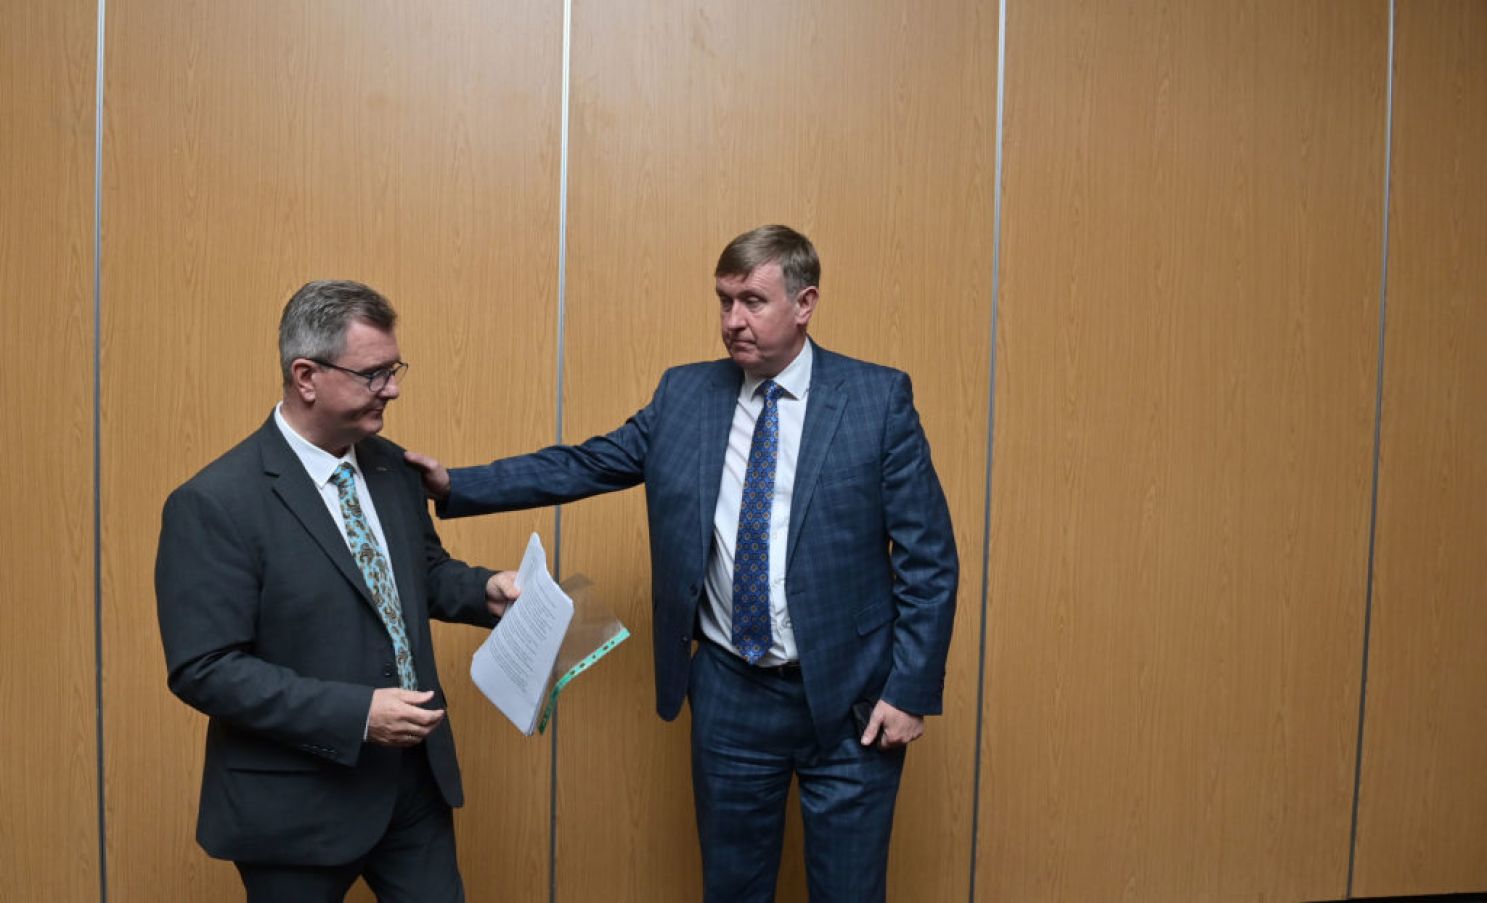 Dup Leader Jeffrey Donaldson (Left) Interacts With Party Member Mervyn Storey In Belfast After Announcing His Party Could Collapse The Stormont Executive If Demands Over The Northern Ireland Protocol Are Not Met. Photo: Charles Mcquillan/Getty